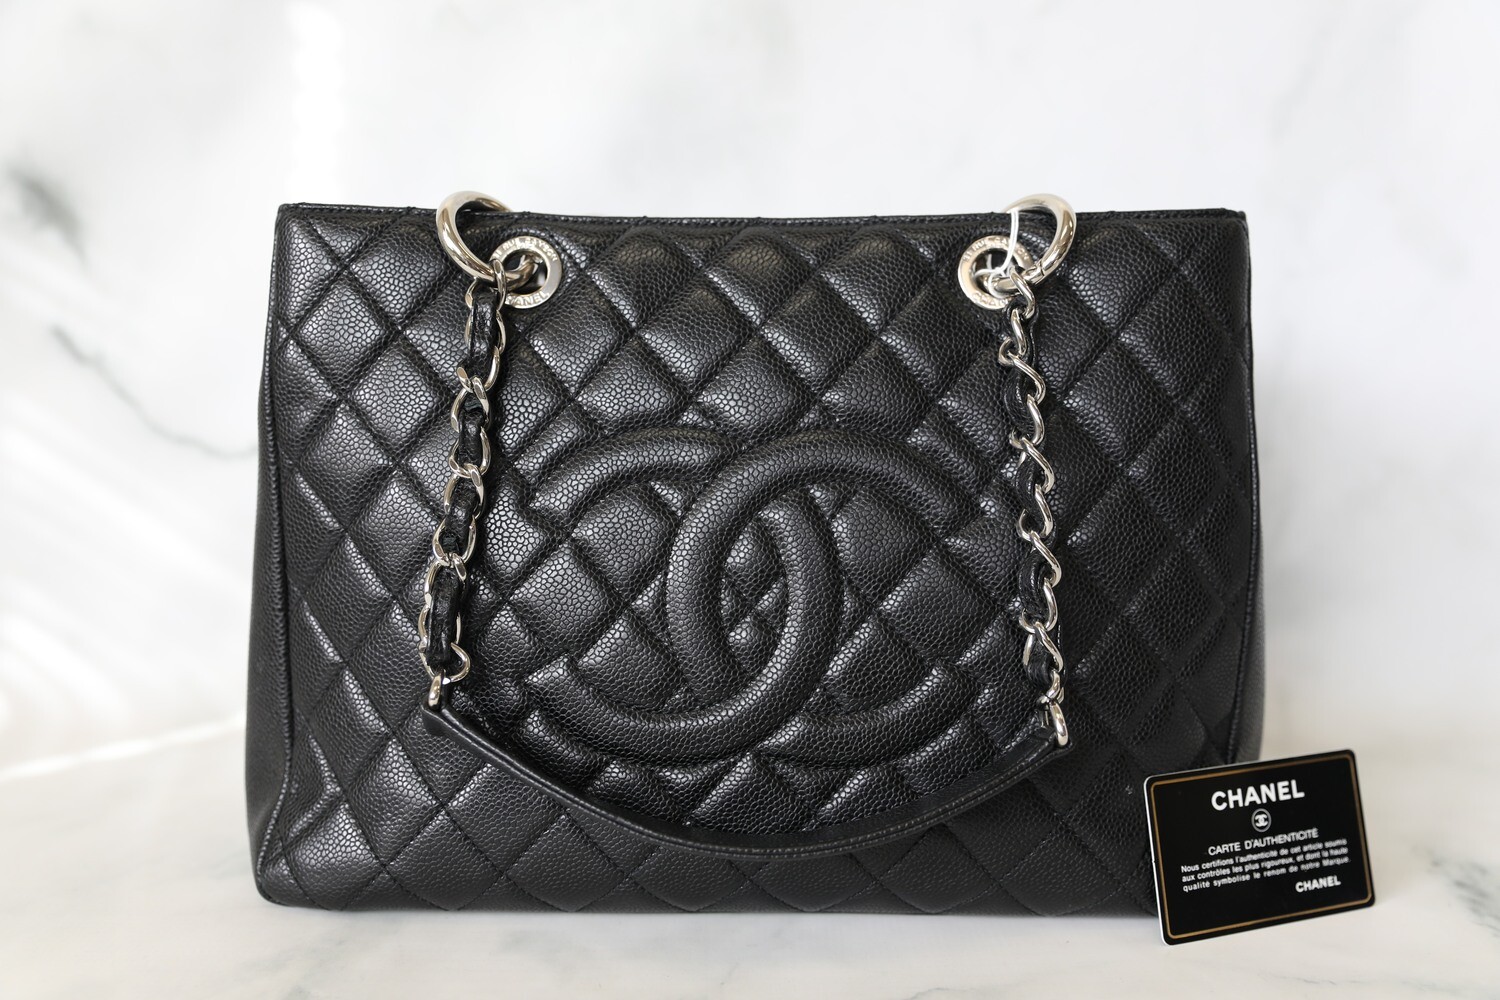 Chanel Grand Shopping Tote GST, Black Caviar with Silver Hardware, Preowned  in Dustbag WA001